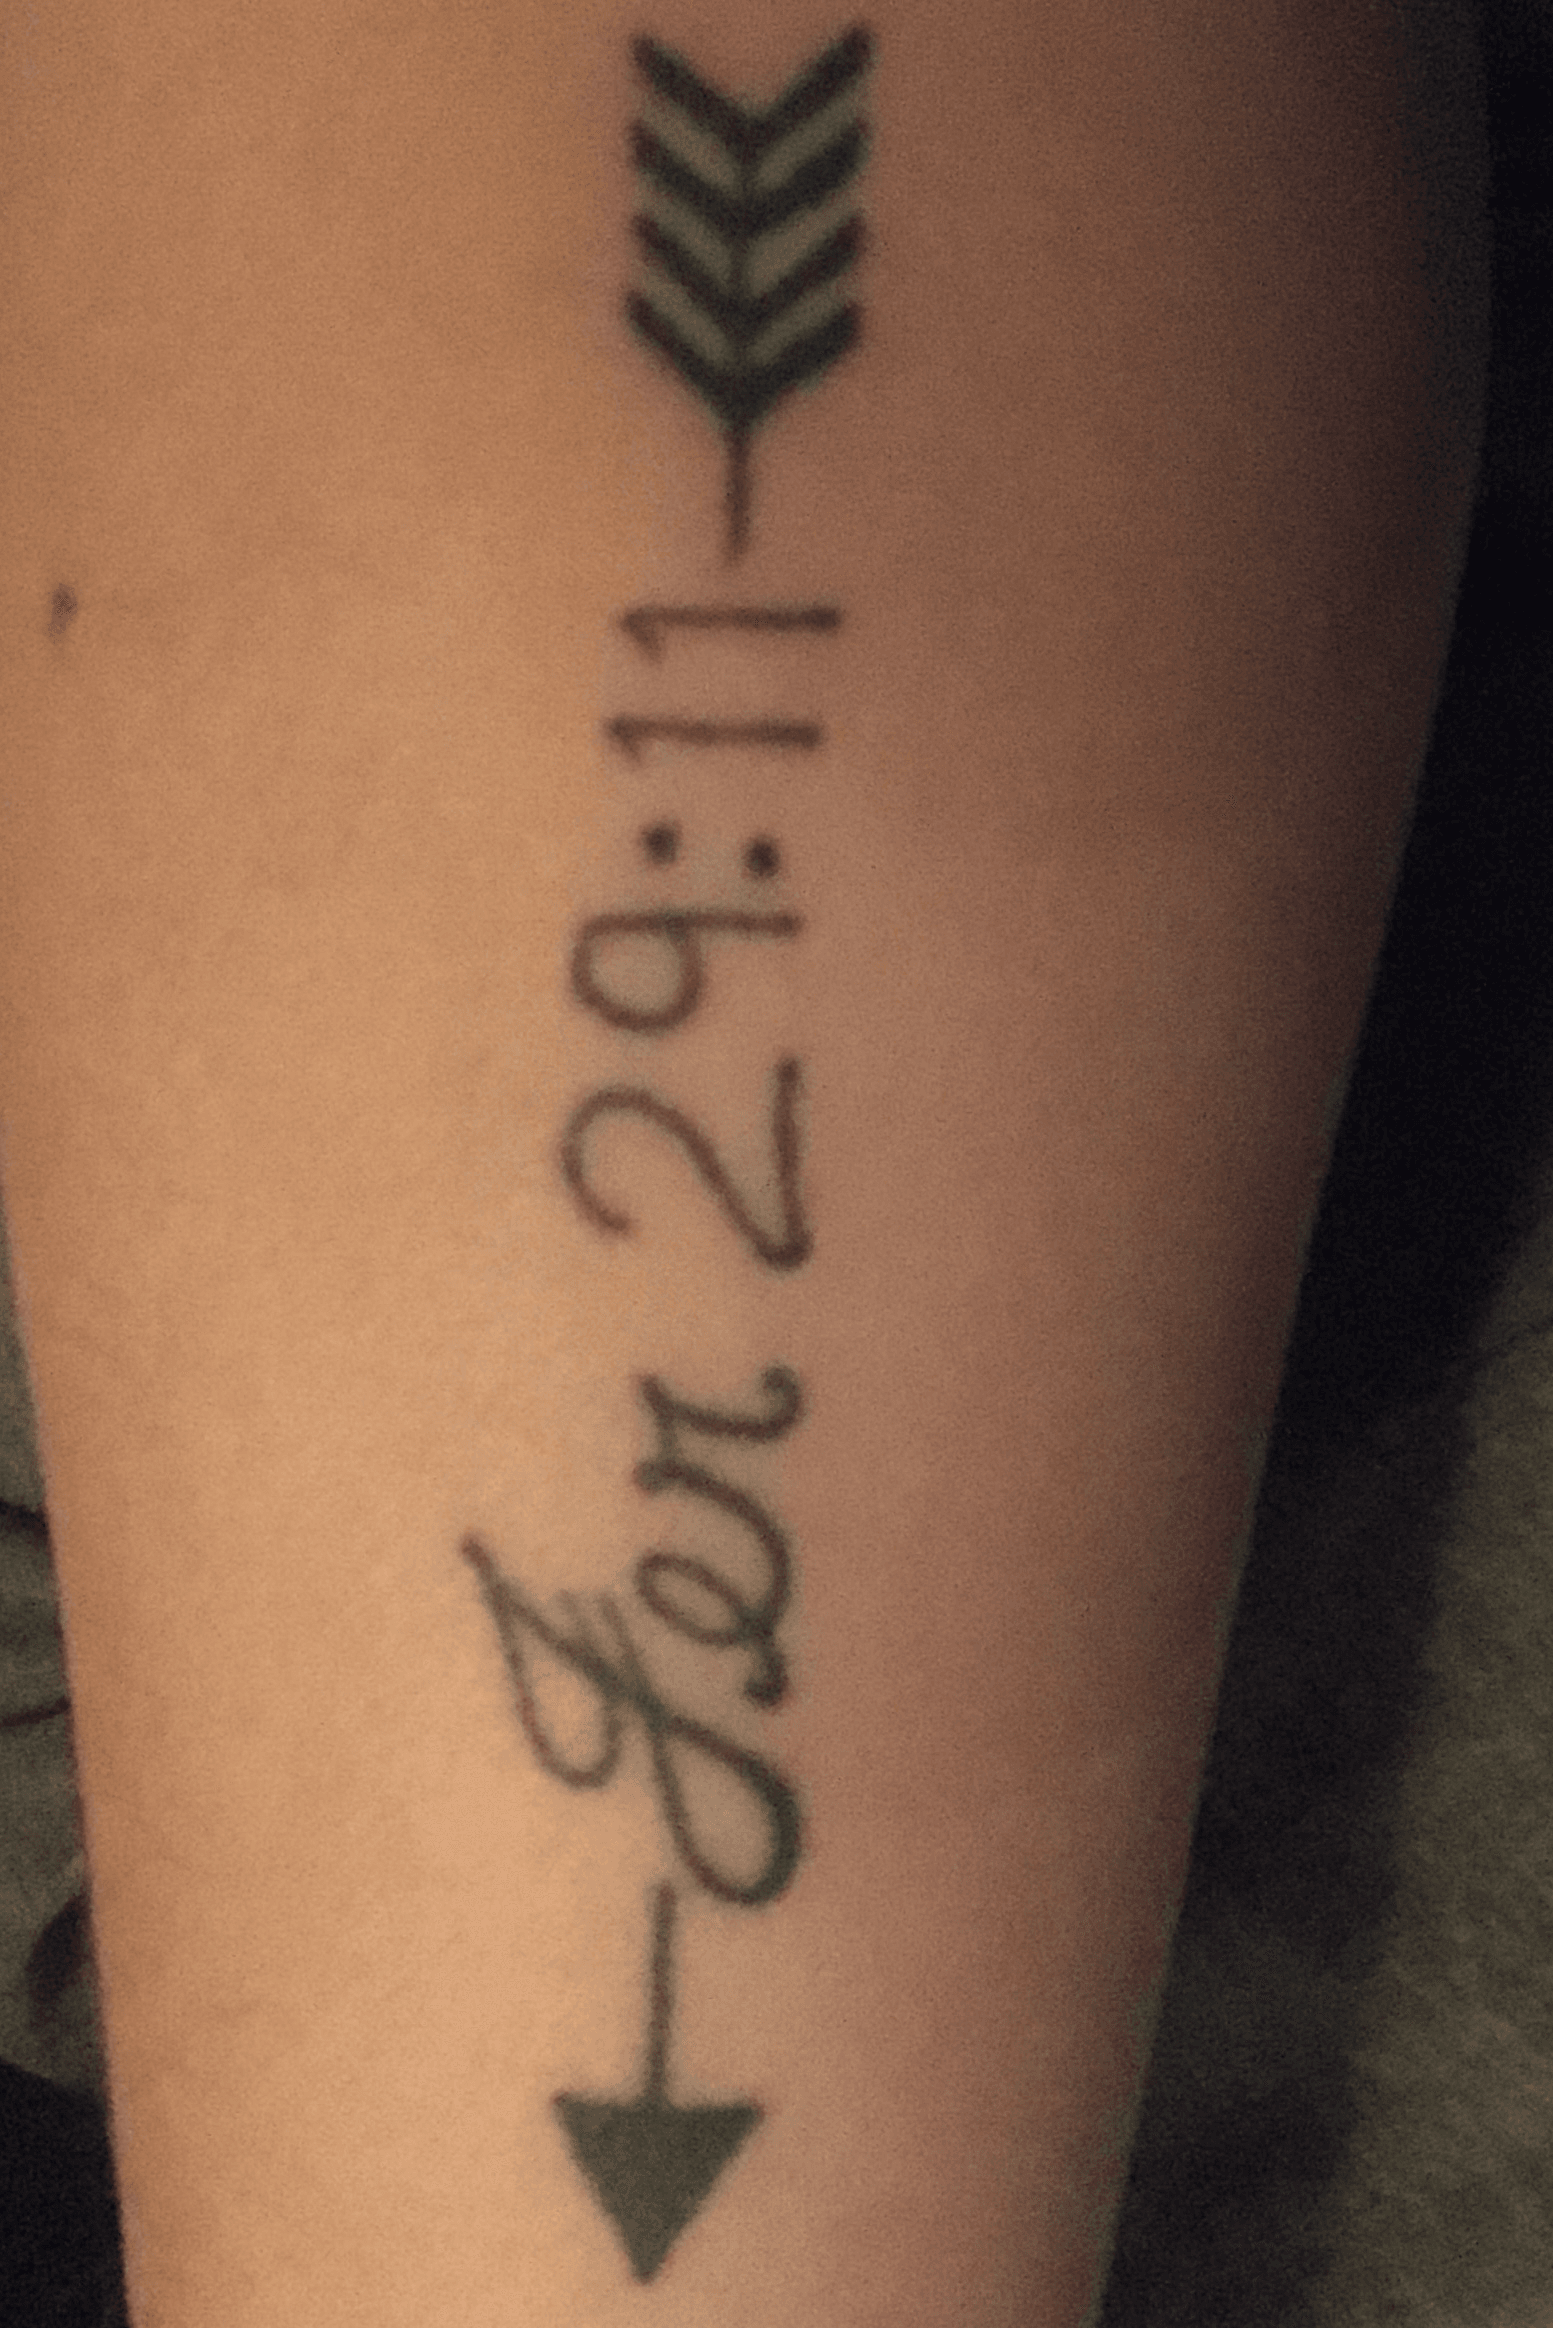 Tattoo uploaded by Jessica Crabtree  Wrist piece Jeremiah 2911 and 14  Pride flag inside a semicolon to represent suicides by the lgbtq community  and a cross in the center to remind